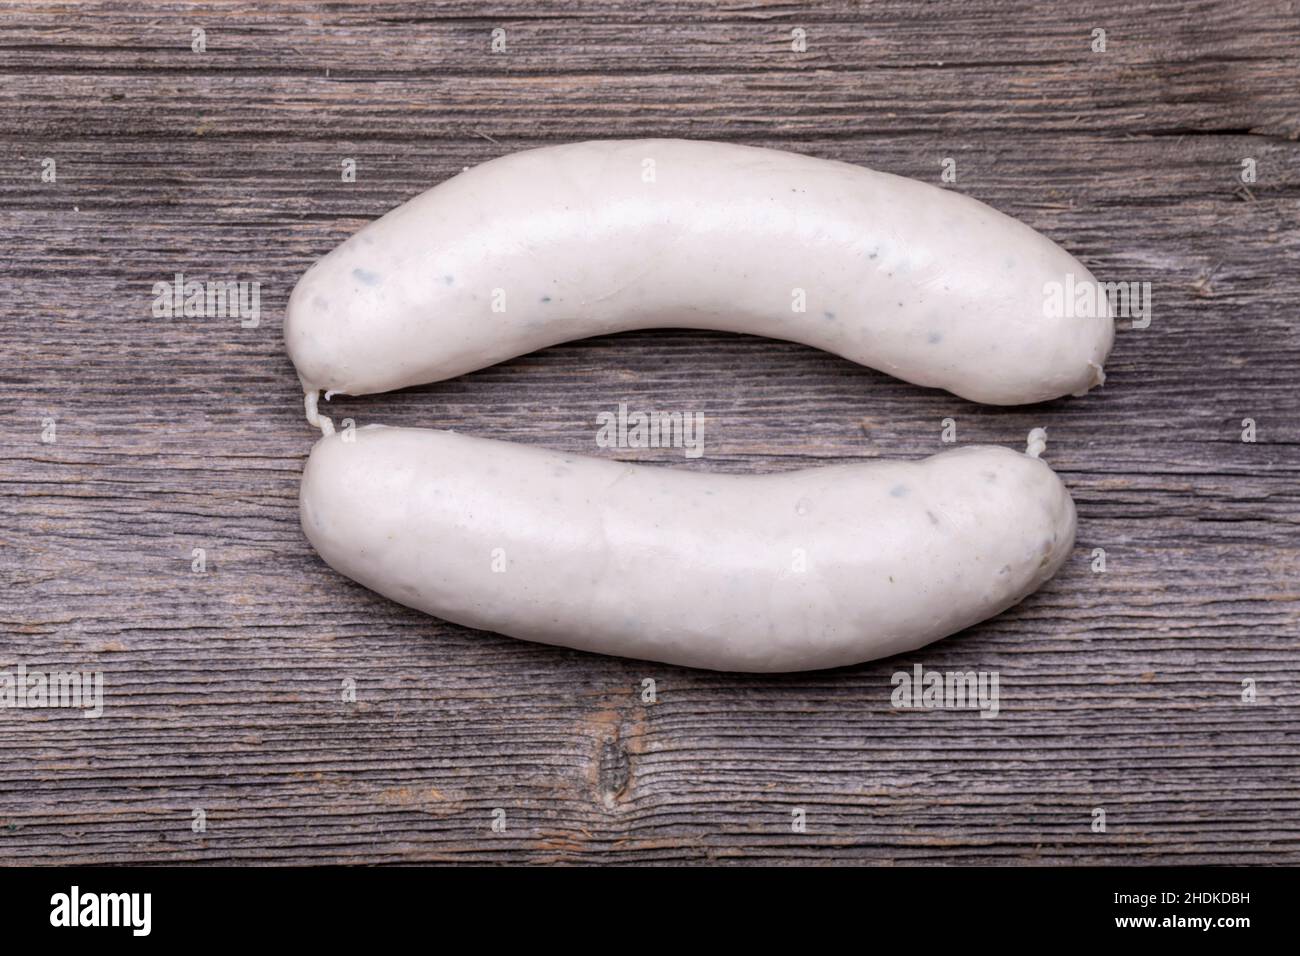 boiled sausage, weisswurst, boiled sausages, weisswursts Stock Photo